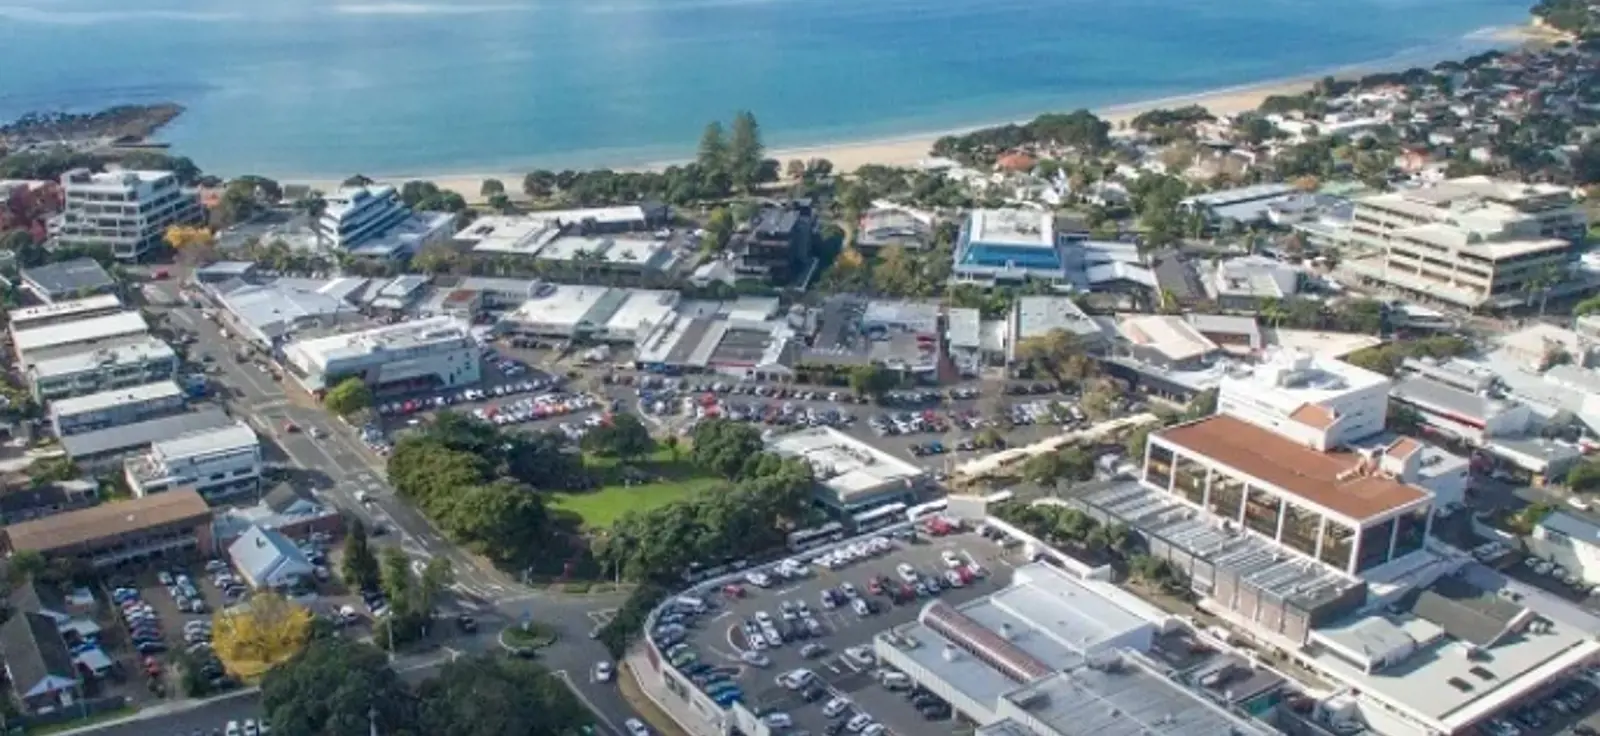 Positive Vibes For Seaside Suburb’S Urban Renewal